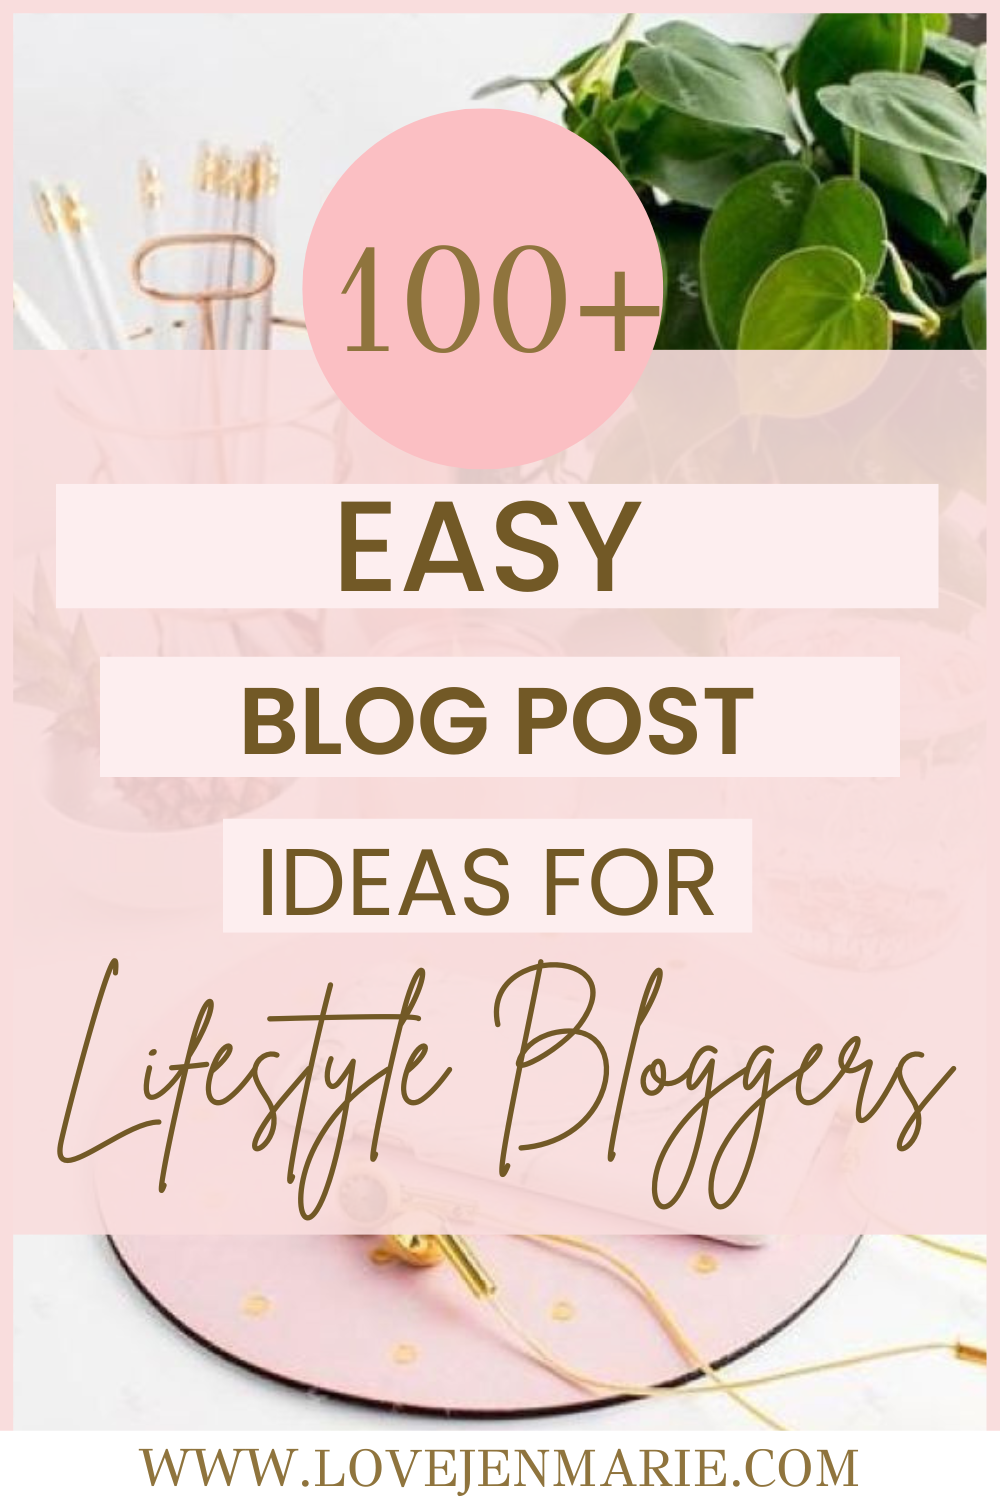 100 + Easy Blog Post Ideas for Lifestyle Bloggers lifestyle blog topics, lifestyle blog post, lifestyle blog, easy blog post ideas, lifestyle blog post ideas, easy lifestyle blog post ideas, lifestyle blogger, blog posts ideas, blog posts topics, holiday blog post ideas, winter blog post ideas, summer blog post ideas, fall blog post ideas, spring blog post ideas, what to write about, what to write about on your blog post